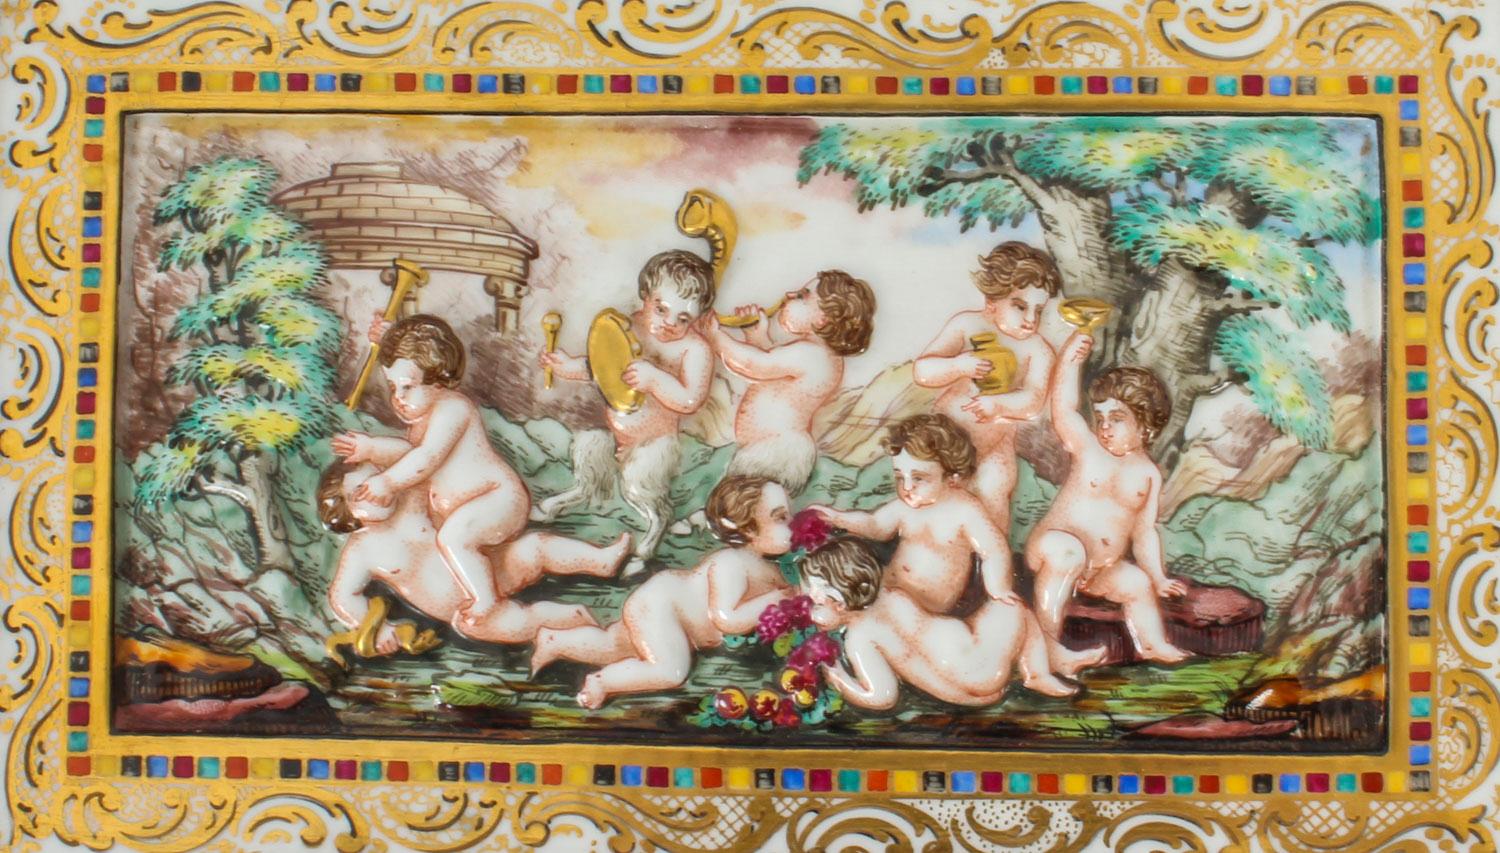 This is a beautiful antique Italian Capodimonte porcelain plaque circa 1820 in date. 

The plaque is housed in a decorative hand carved walnut frame and the scene depicts cherubs at play.

Condition:
In really excellent condition, please see